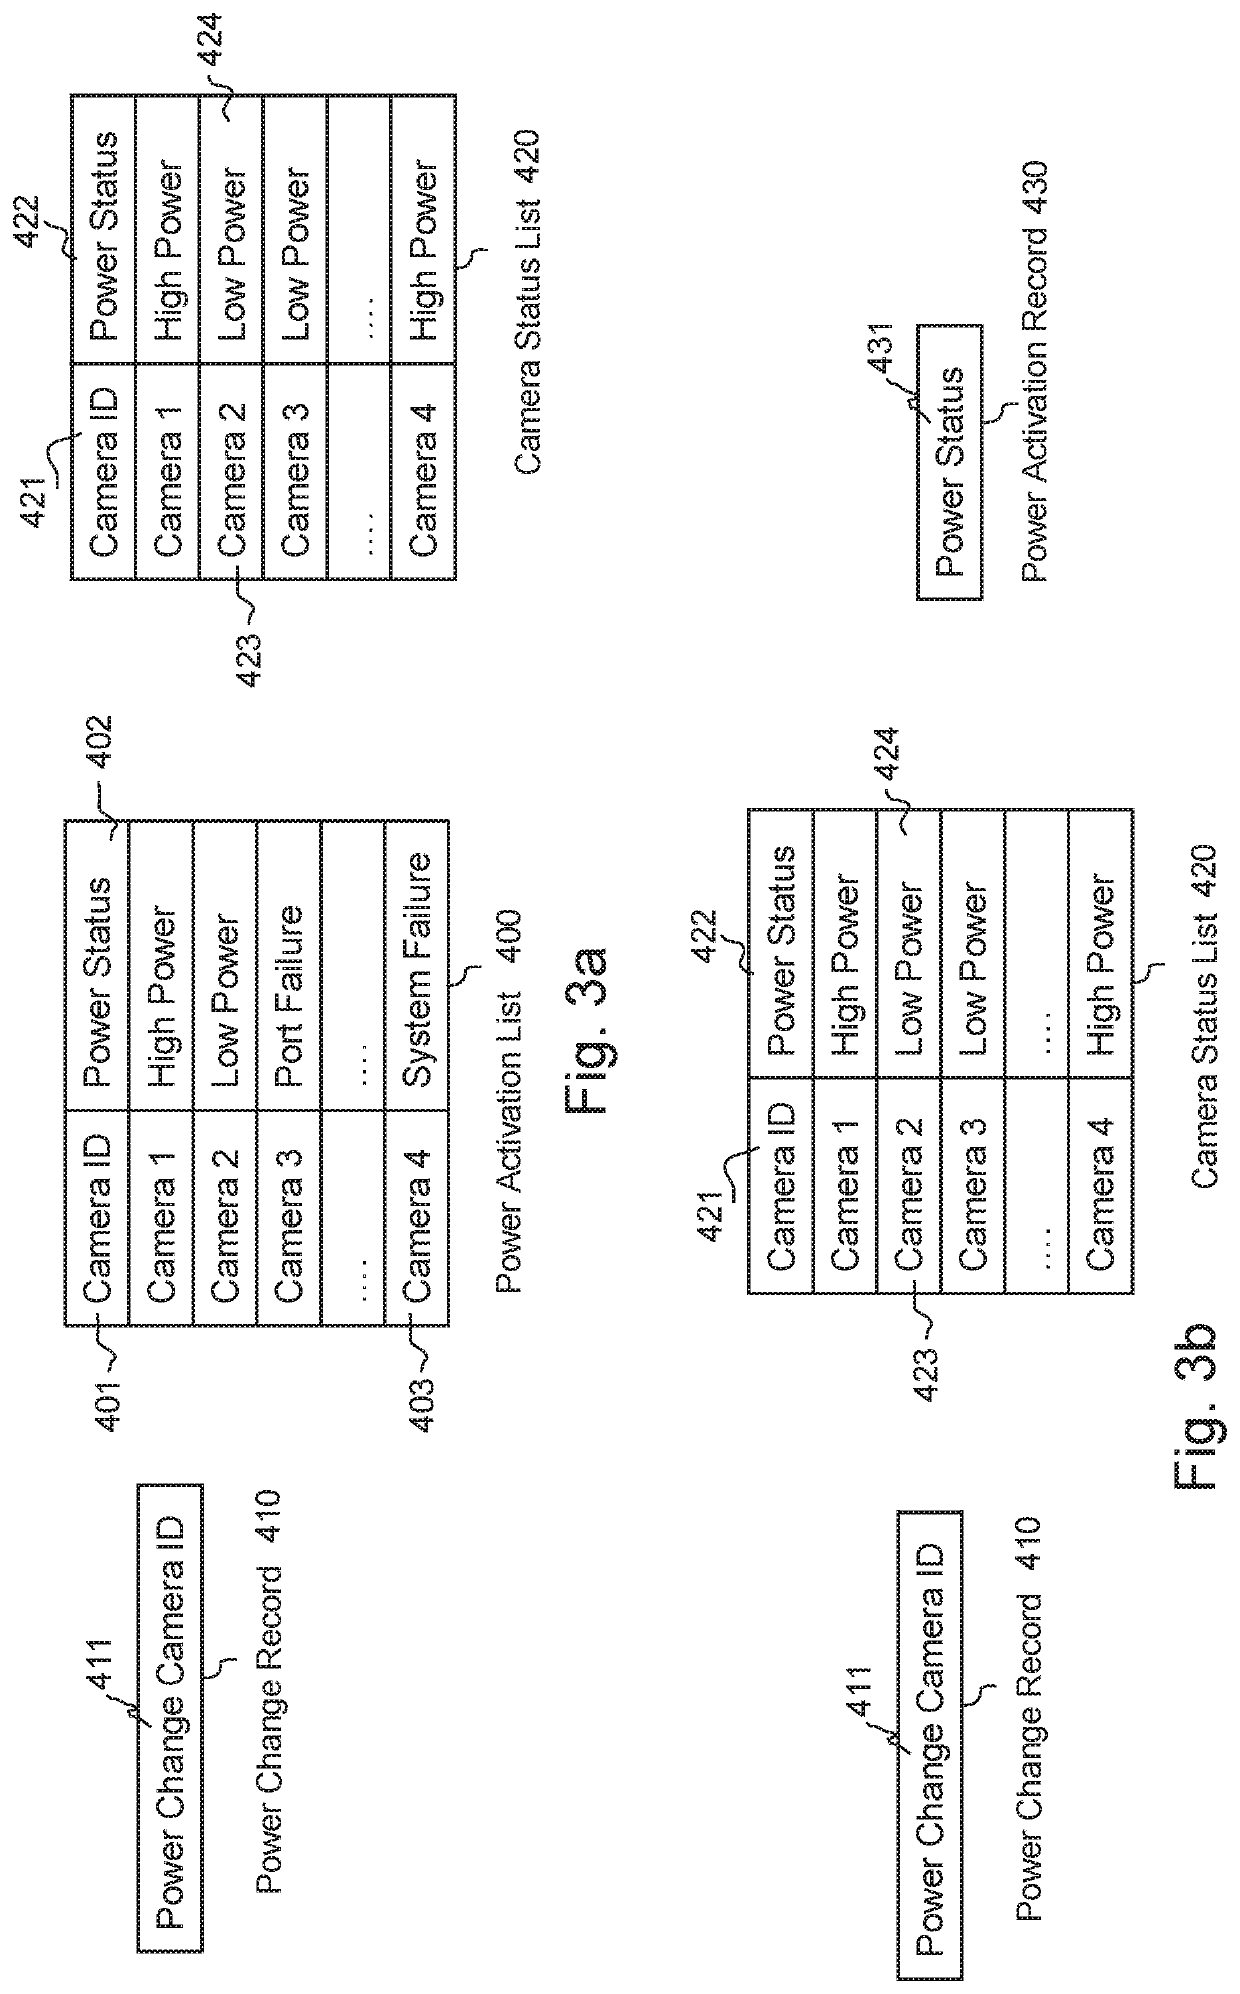 Power management method of a system made of devices powered over data cable